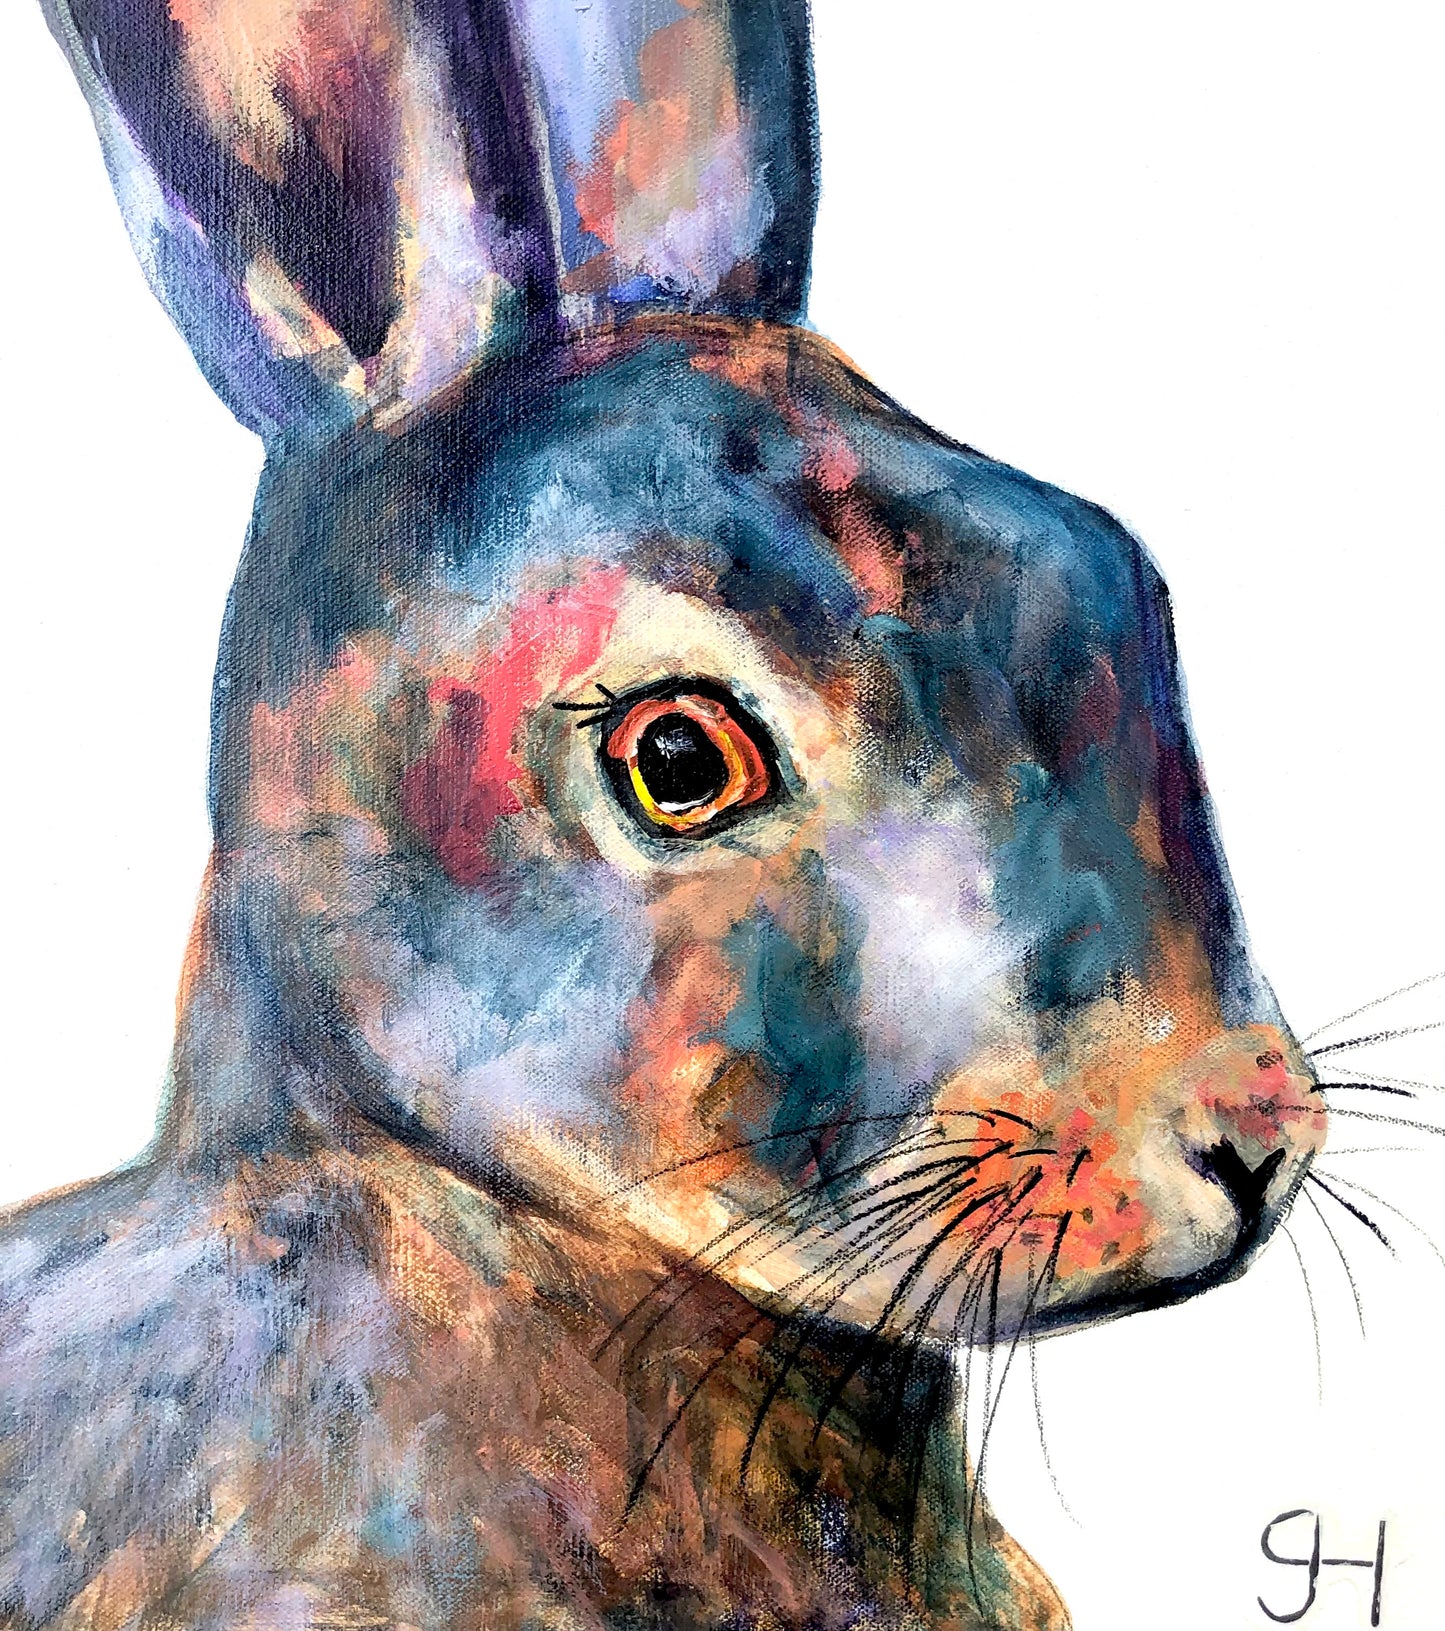 Horace the hare.